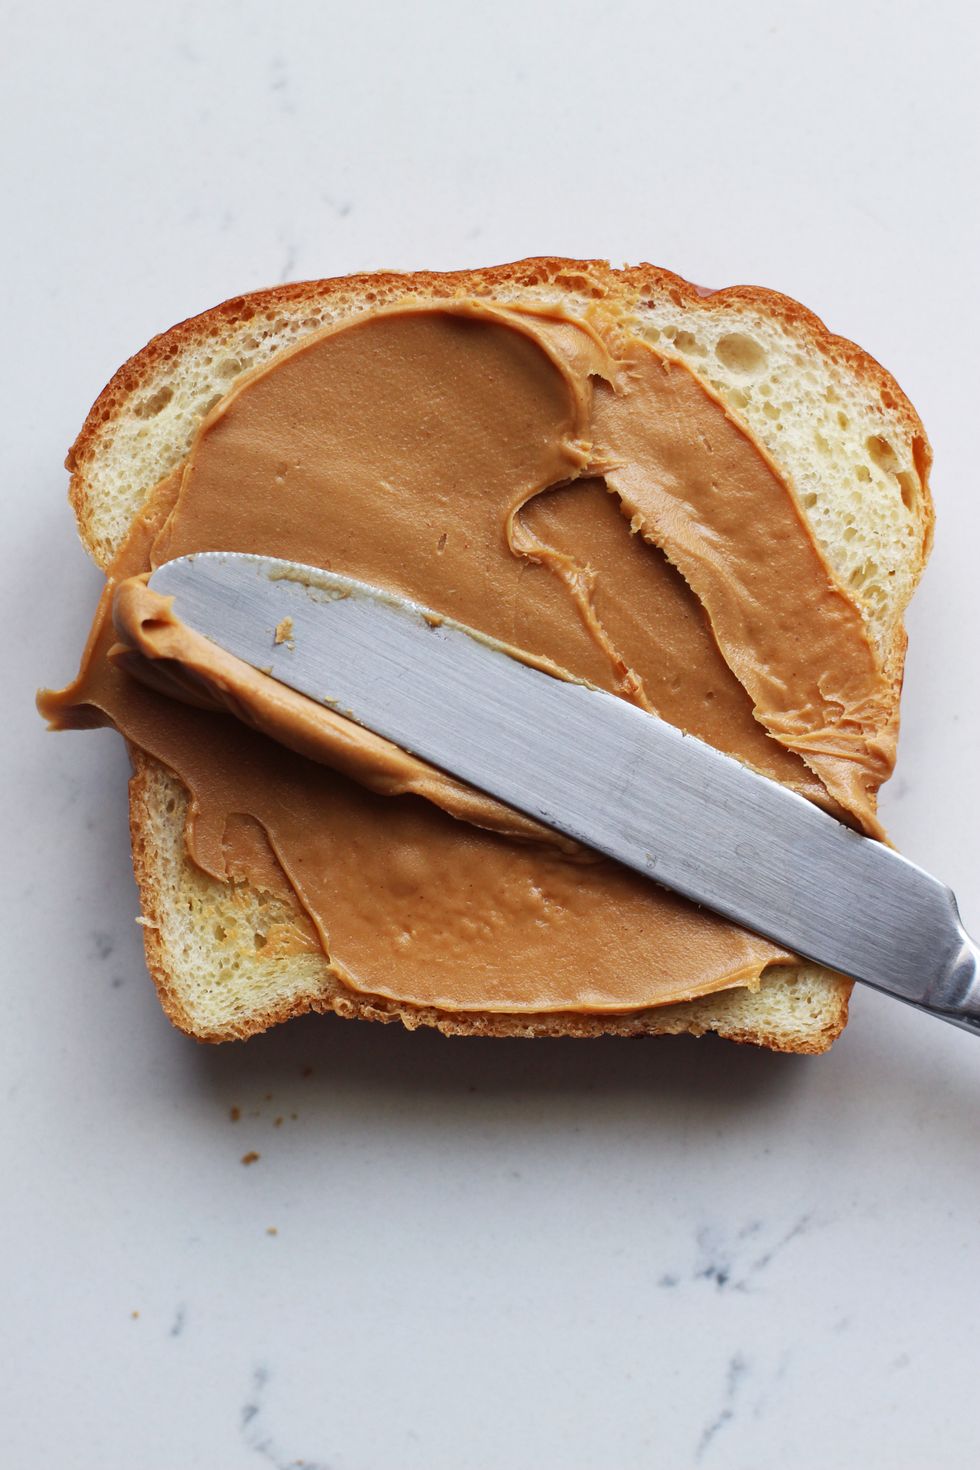 15 Recipes Every Peanut Butter Fanatic Can Get Creative With